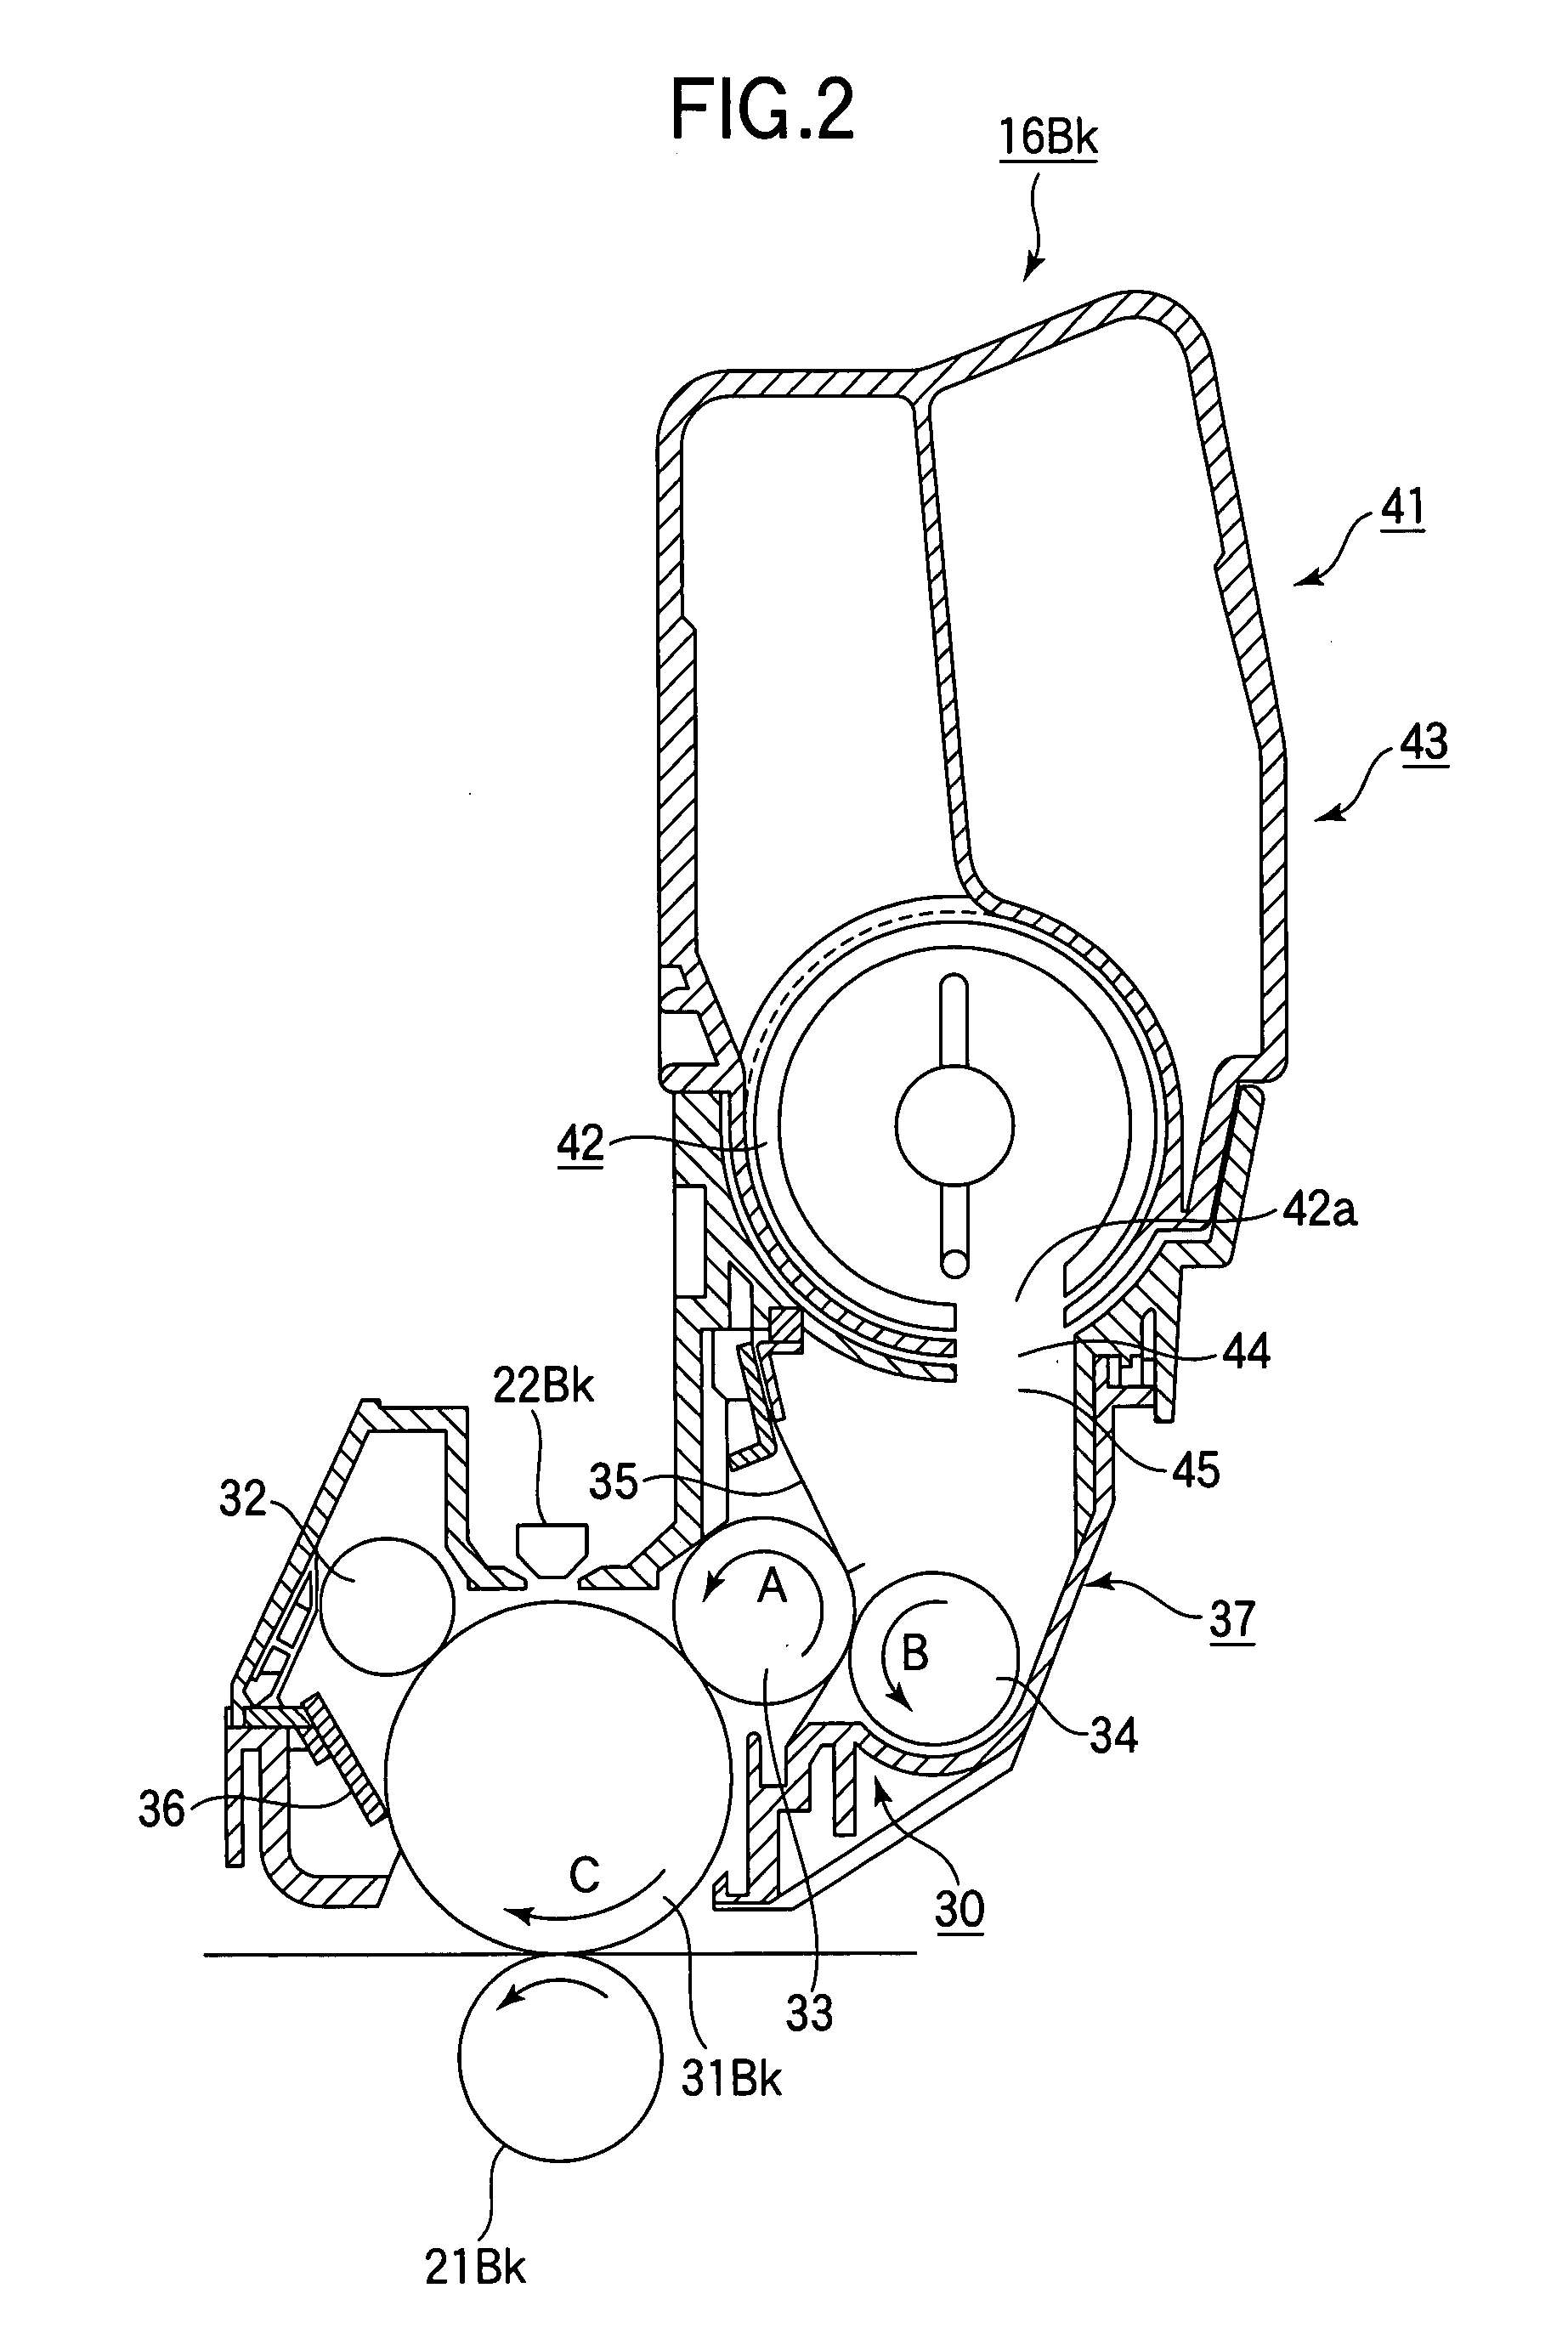 Developer material container, image forming unit, and image forming apparatus